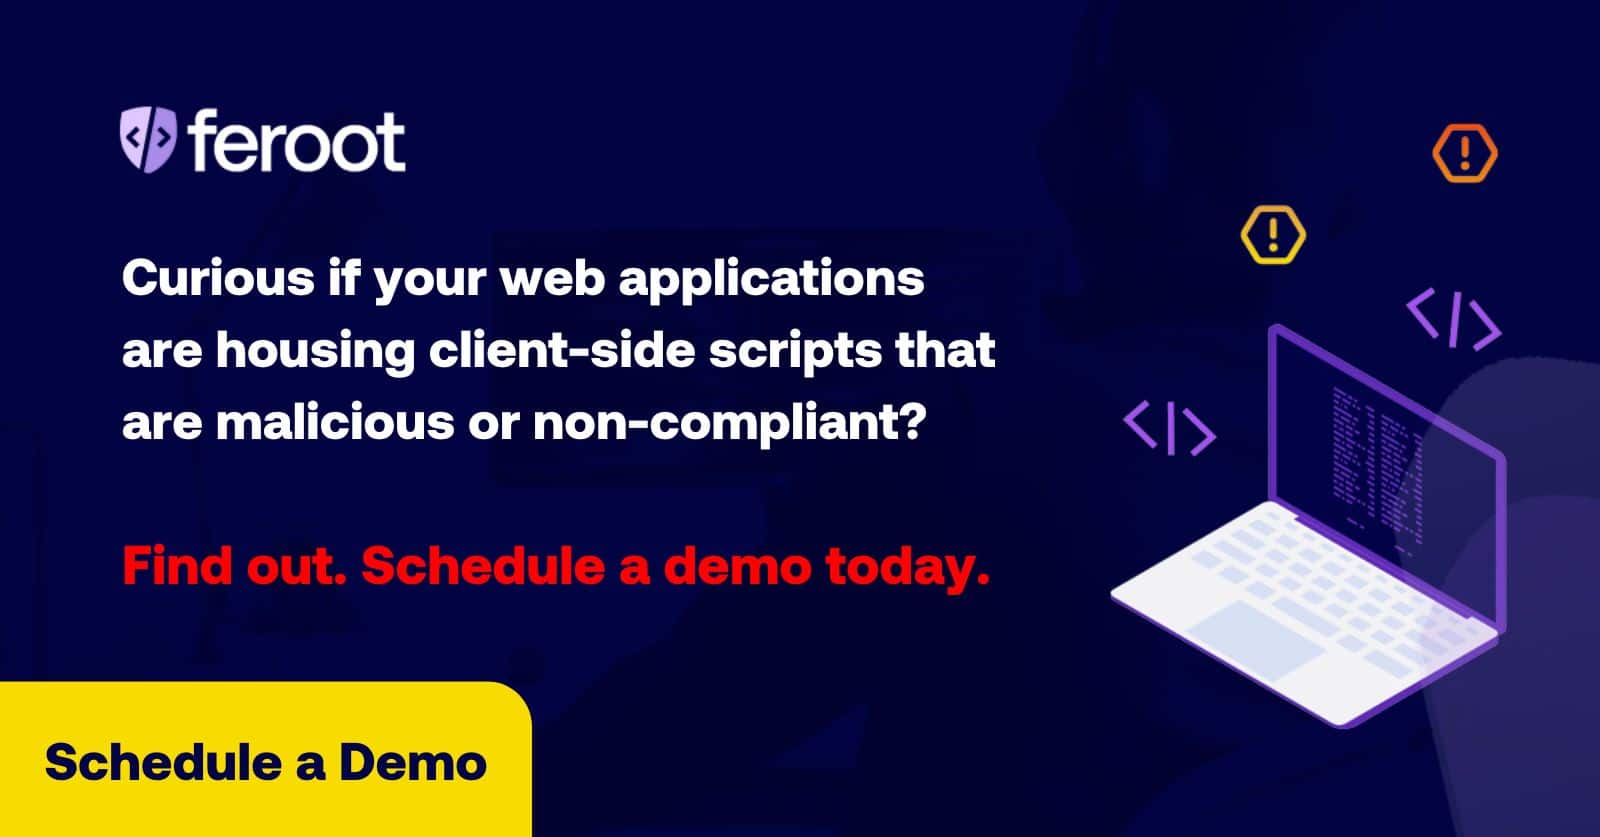 Curious if your web applications are housing client-side scripts that are malicious or non-compliant? Find out. Schedule a demo today. Client-side web app risks banking and investment.